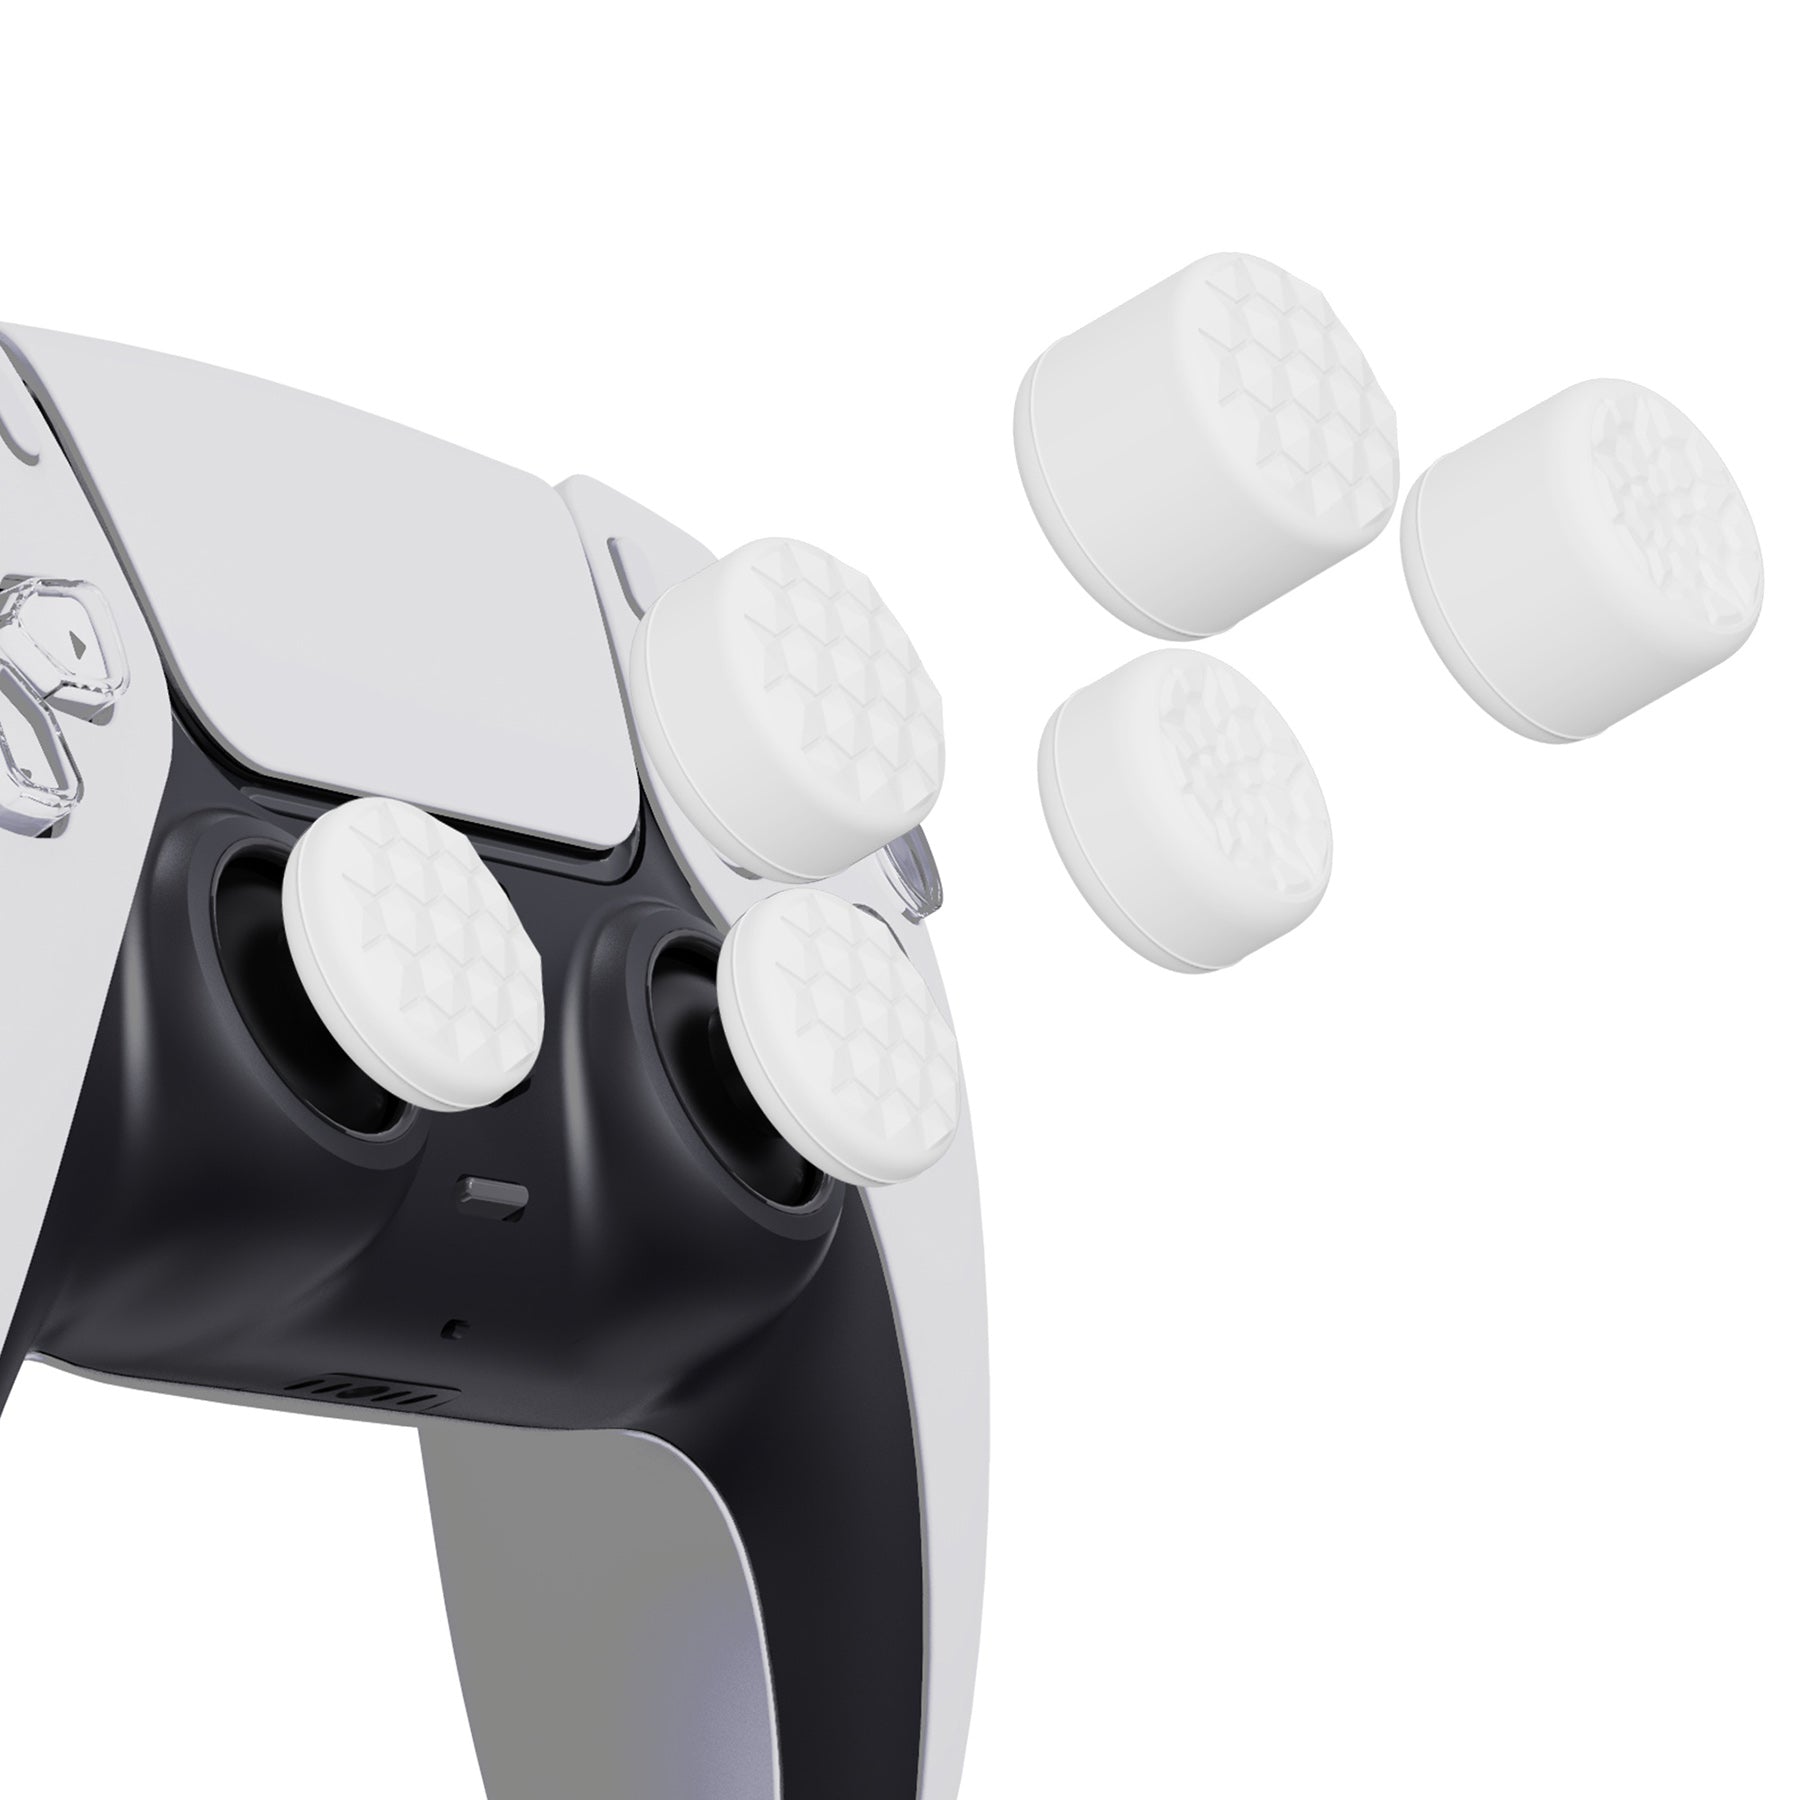 PlayVital White Ergonomic Stick Caps Thumb Grips for PS5, PS4, Xbox Series X/S, Xbox One, Xbox One X/S, Switch Pro Controller - with 3 Height Convex and Concave - Diamond Grain & Crack Bomb Design - PJM2014 PlayVital